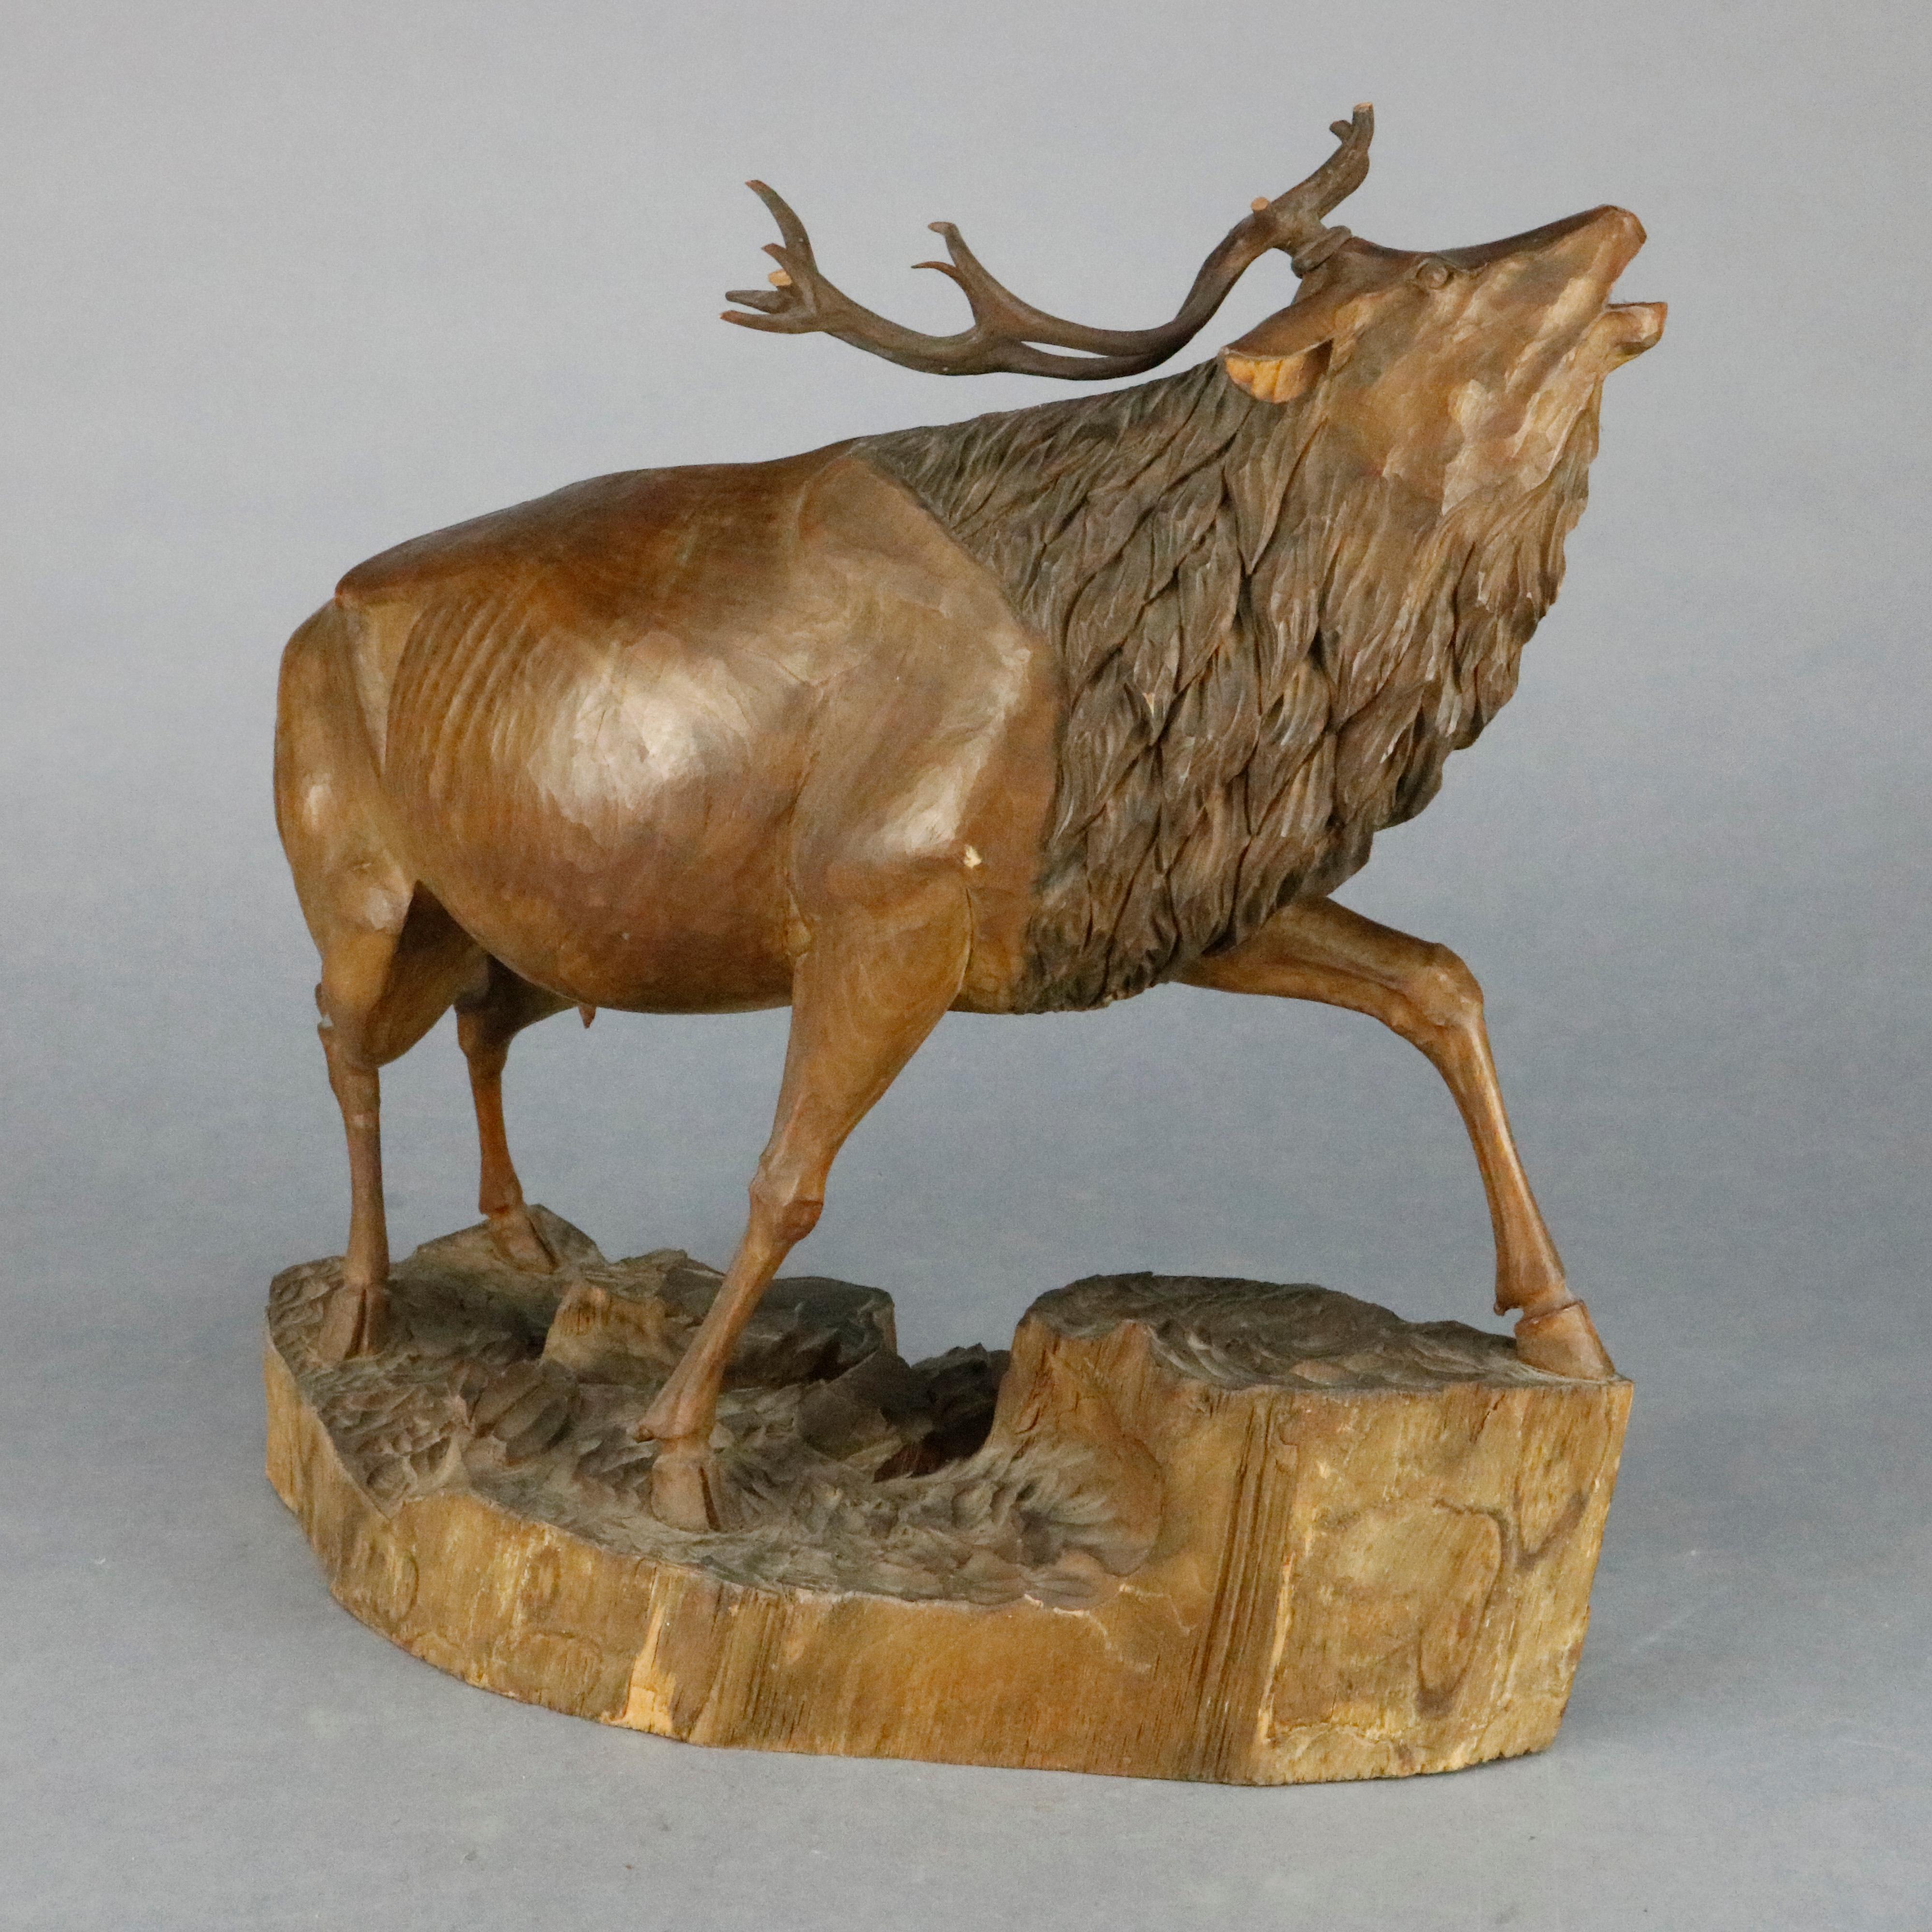 An antique German Black Forest sculpture depicts hand carved wood bugling elk climbing mountain in countryside setting, circa 1890

Measures: 14.75